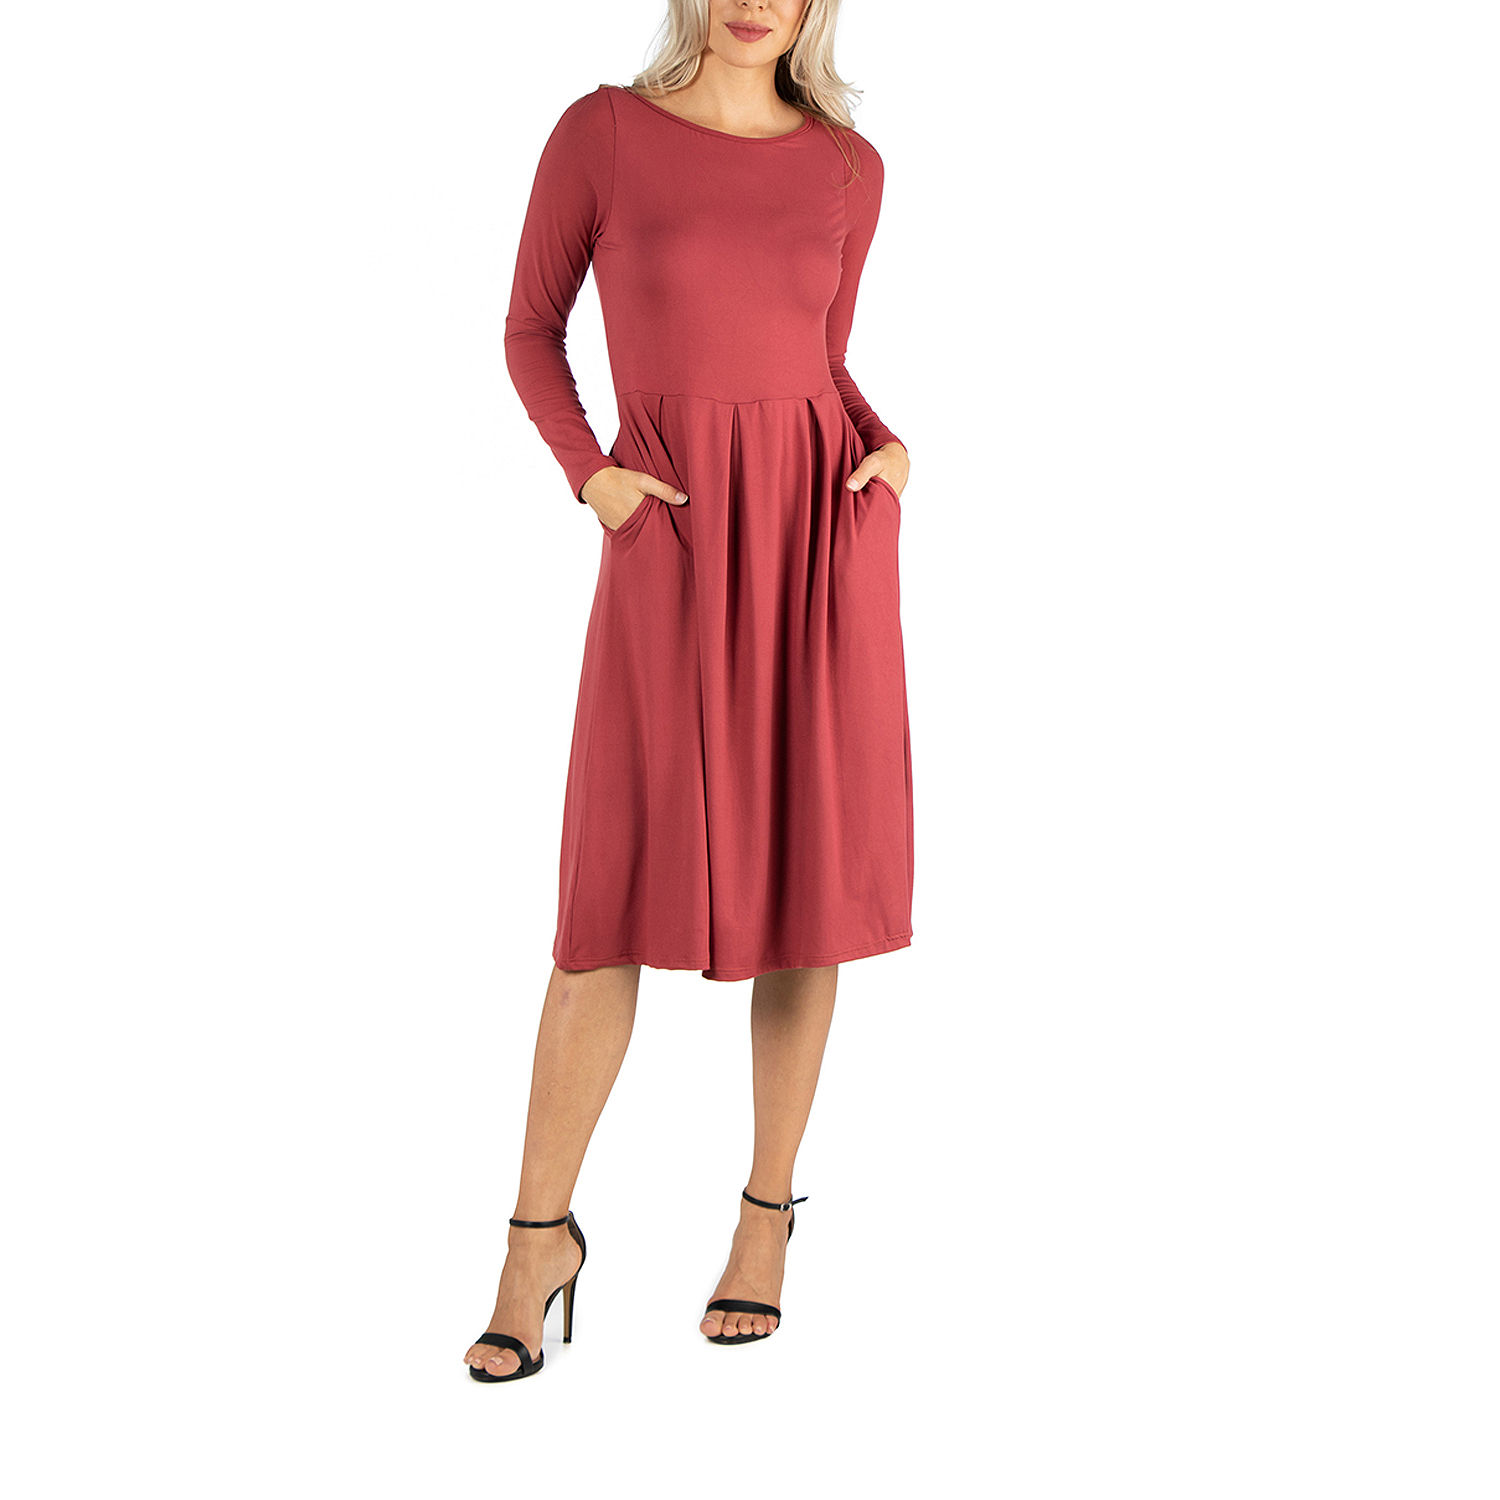 24/7 Comfort Apparel Midi Fit and Flare Dress - JCPenney